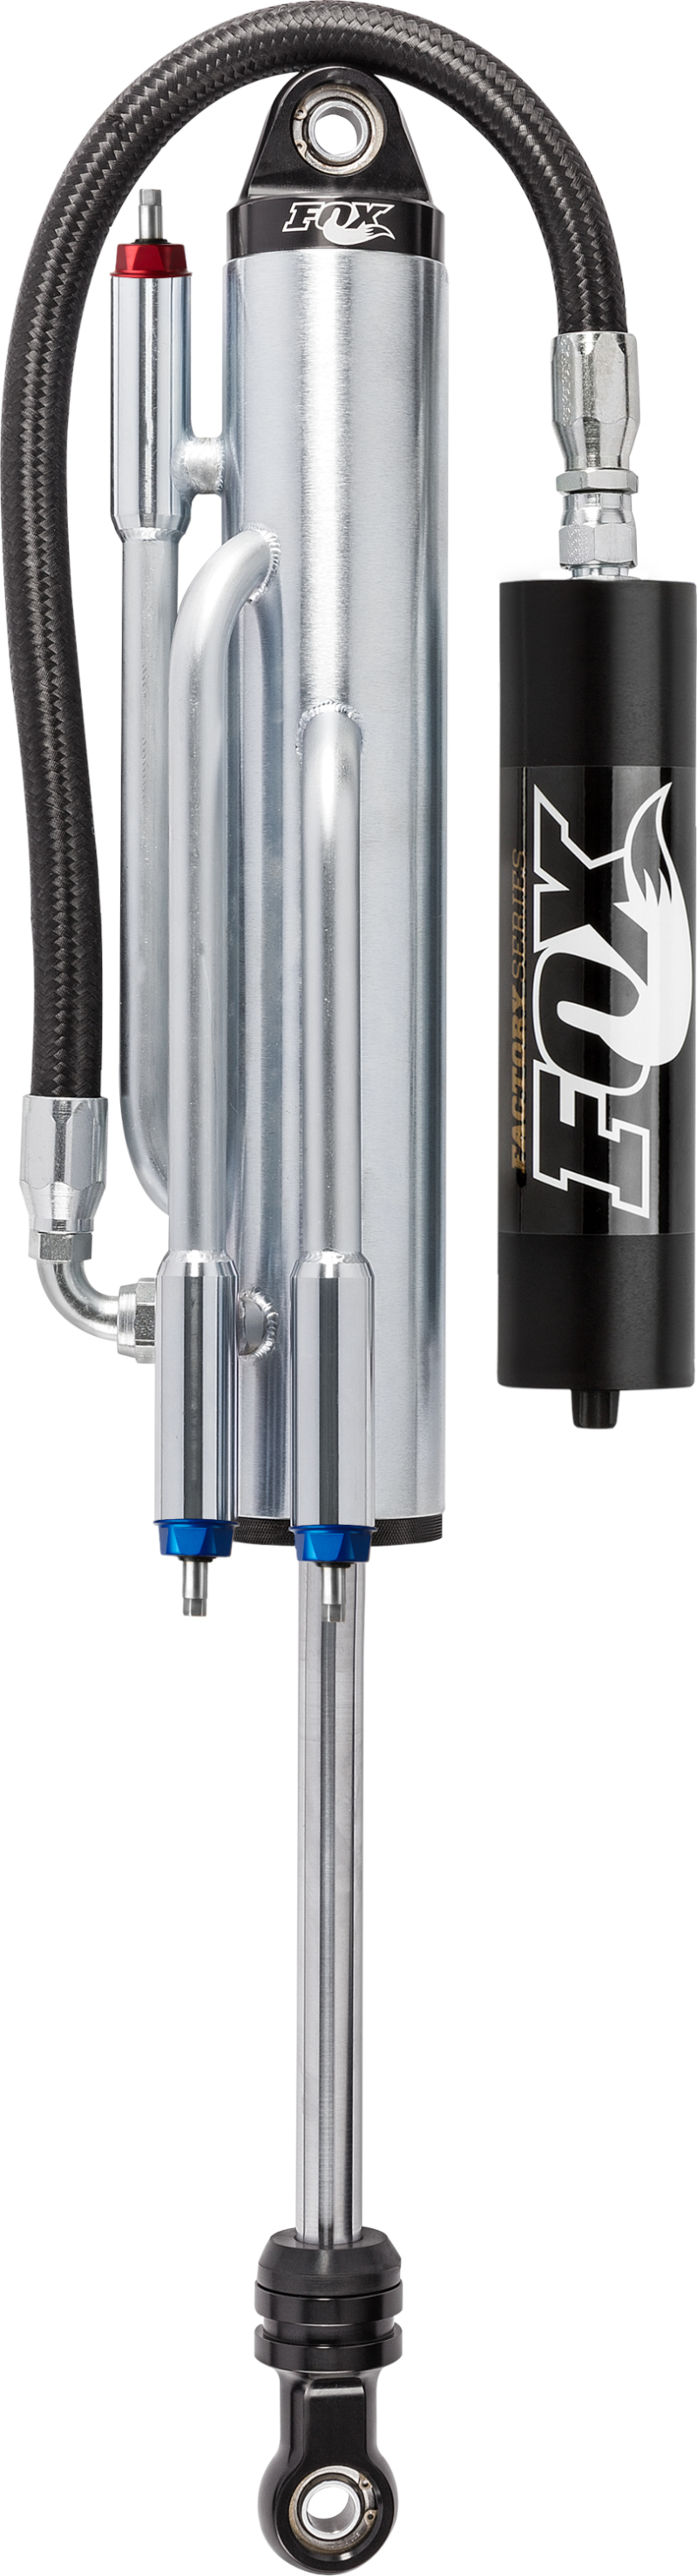 Fox 2.5 Factory Series 10in Remote Res. 3-Tube Bypass (2 Comp/1 Reb) Shock 7/8in (Cust. Valv) - Blk - 980-02-138-1